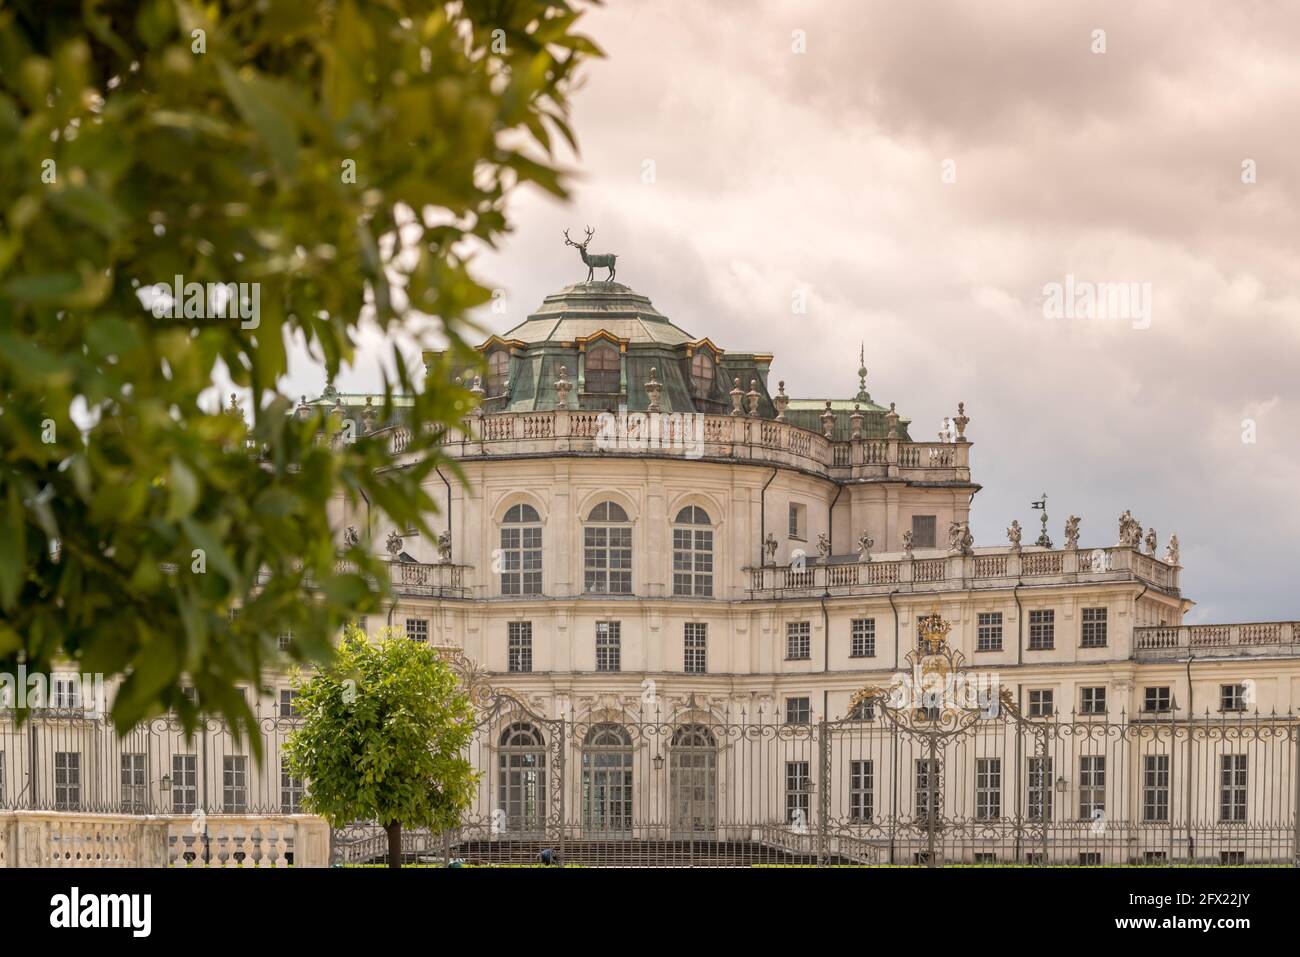 Stupinigi, Turin, Italy: historic royal hunting lodge of the Savoy royal house, selective focus blurred leaves in the foreground Stock Photo